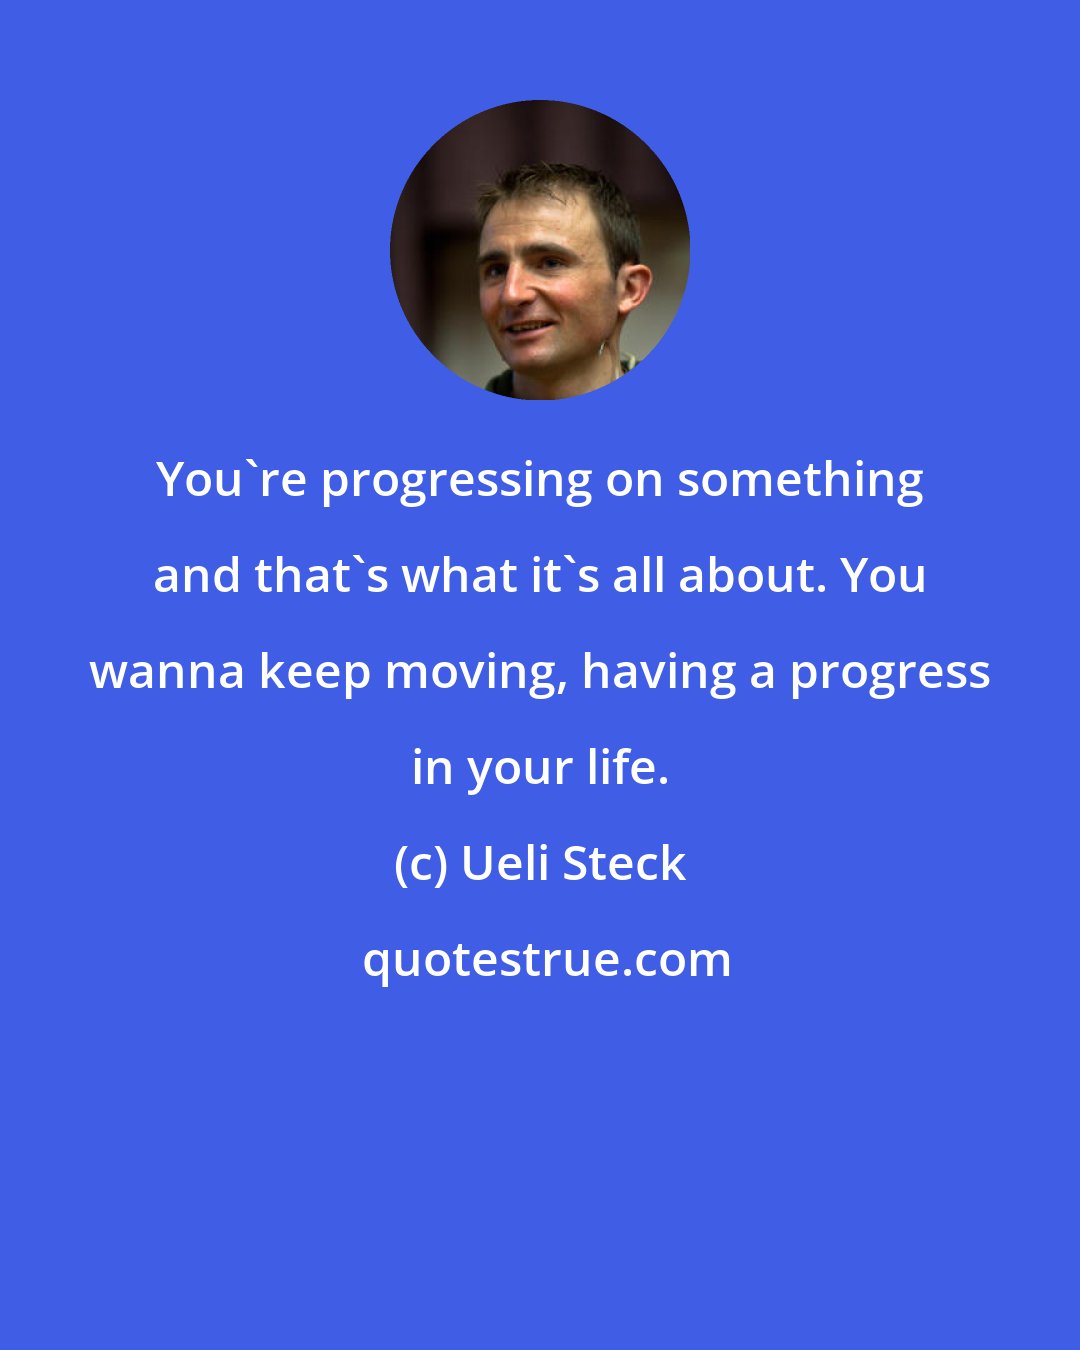 Ueli Steck: You're progressing on something and that's what it's all about. You wanna keep moving, having a progress in your life.